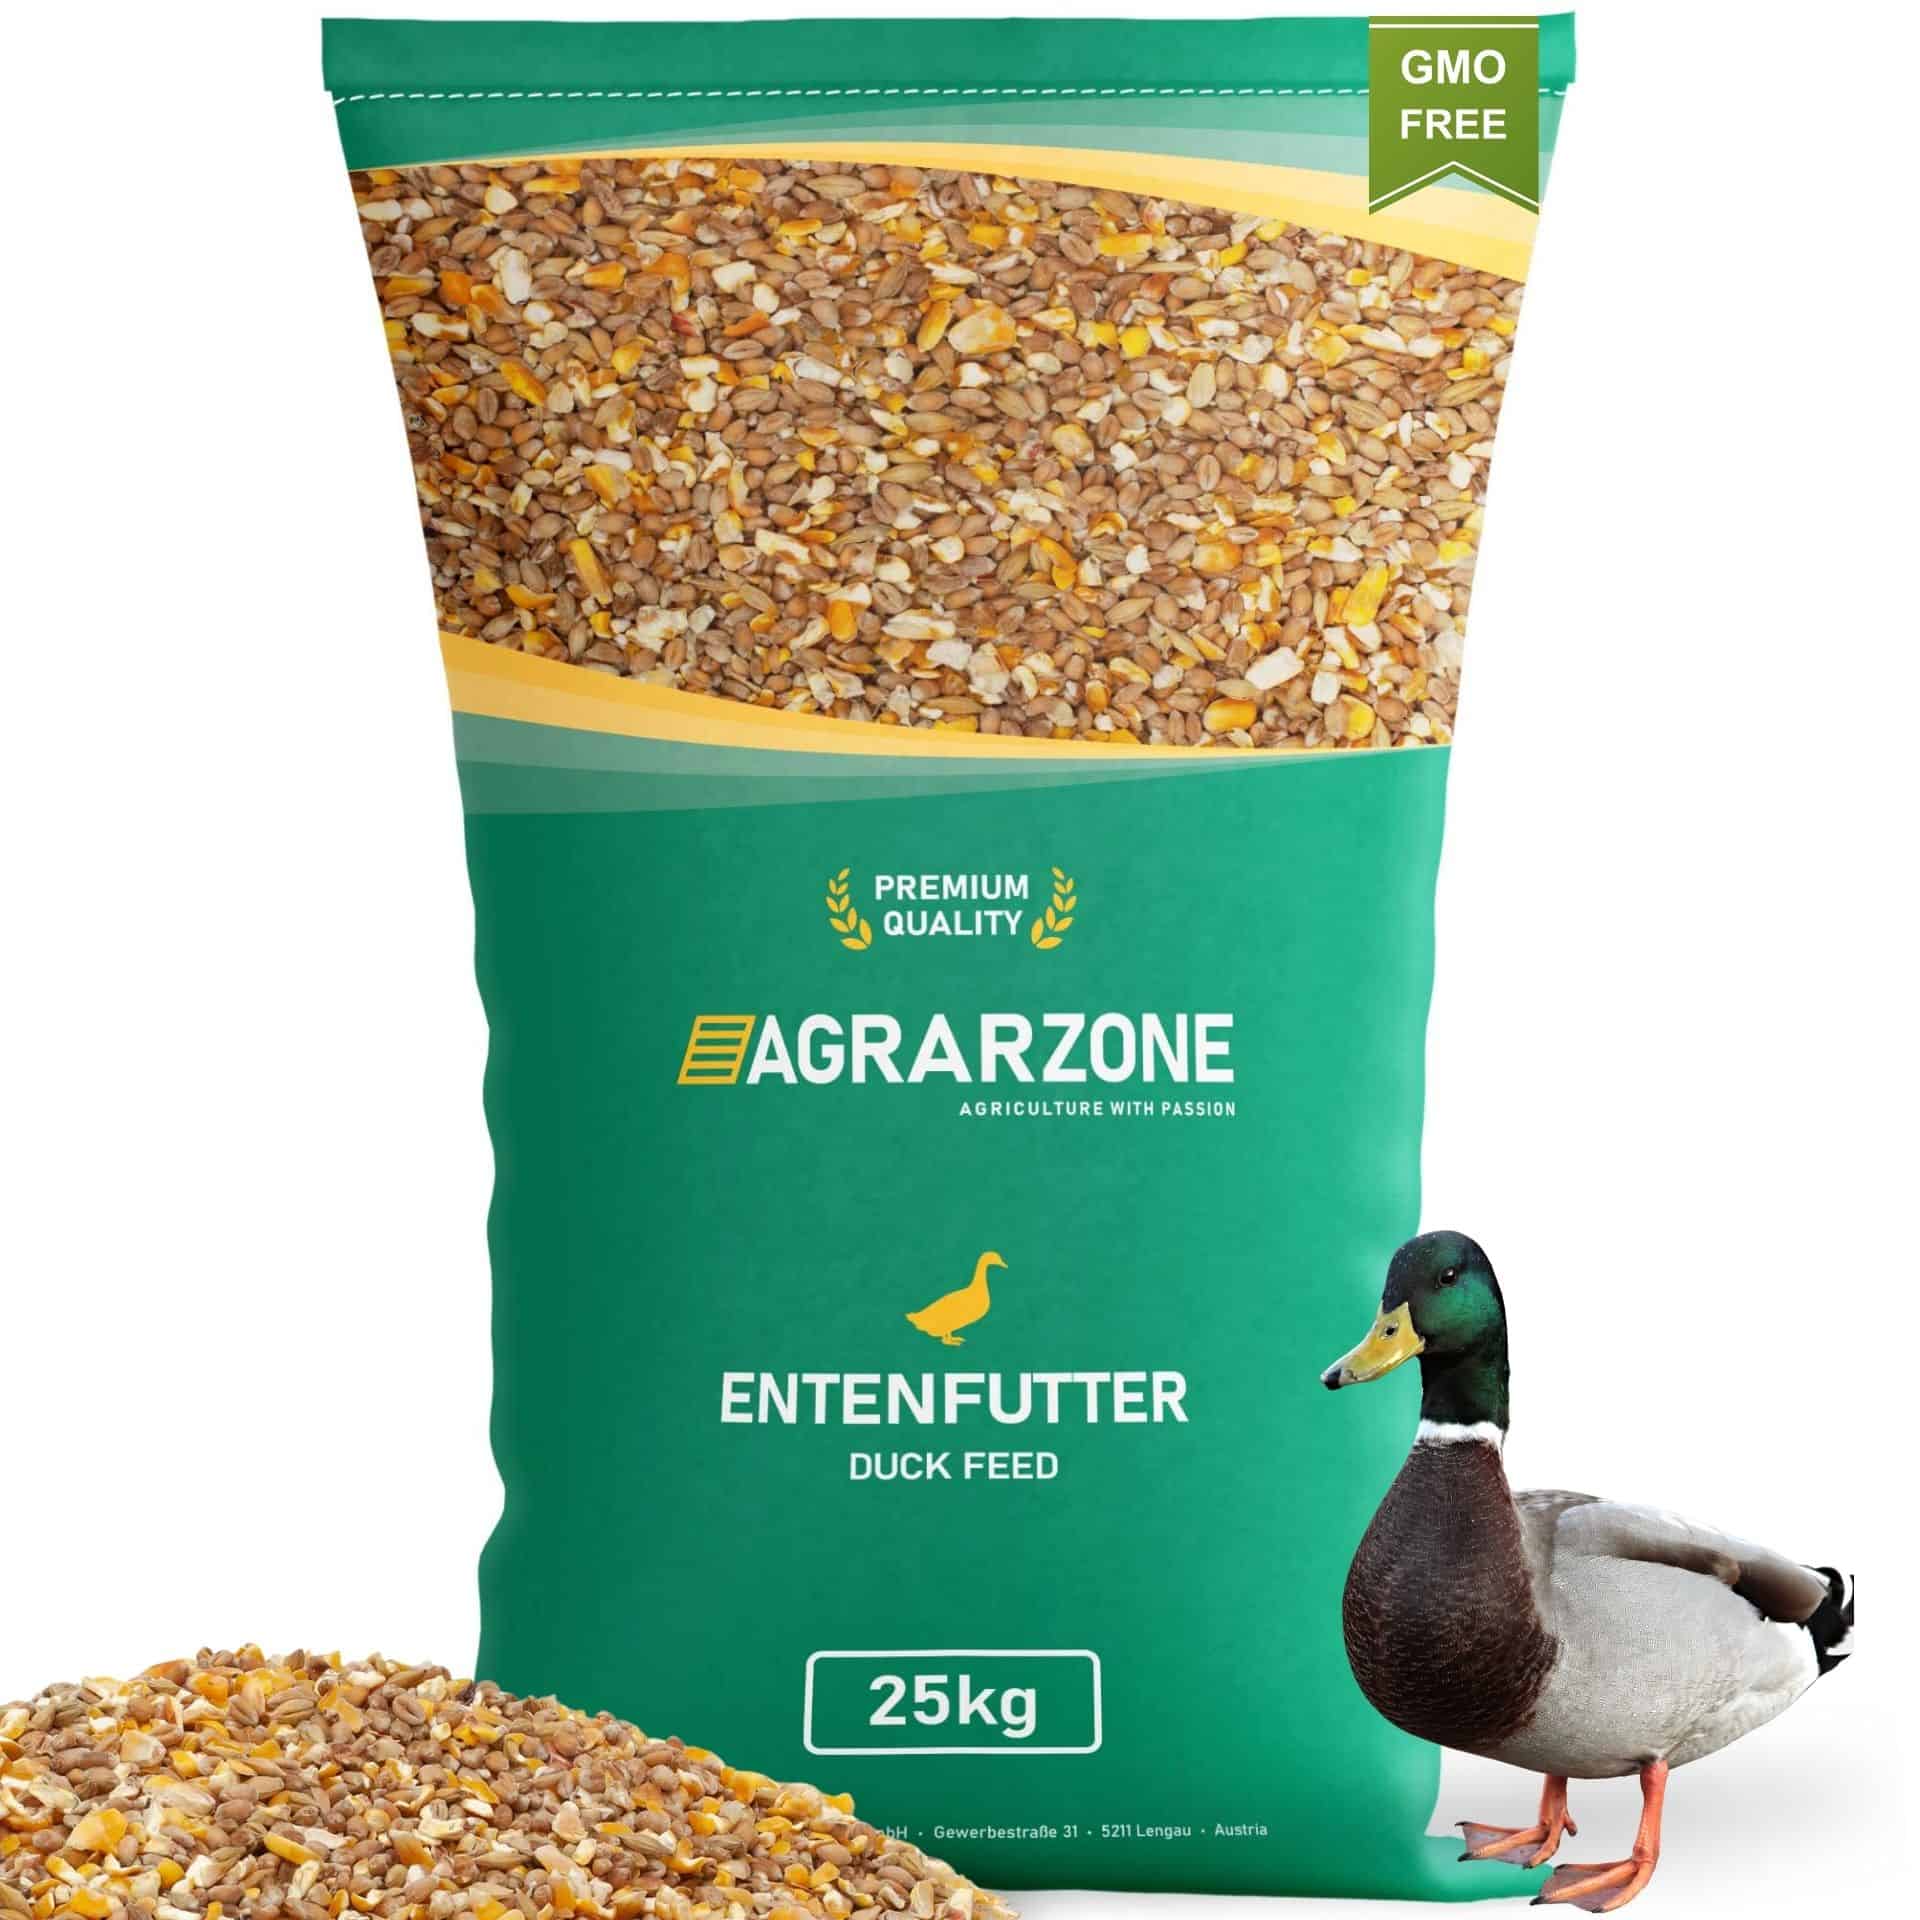 Agrarzone ankfoderkorn 25 kg